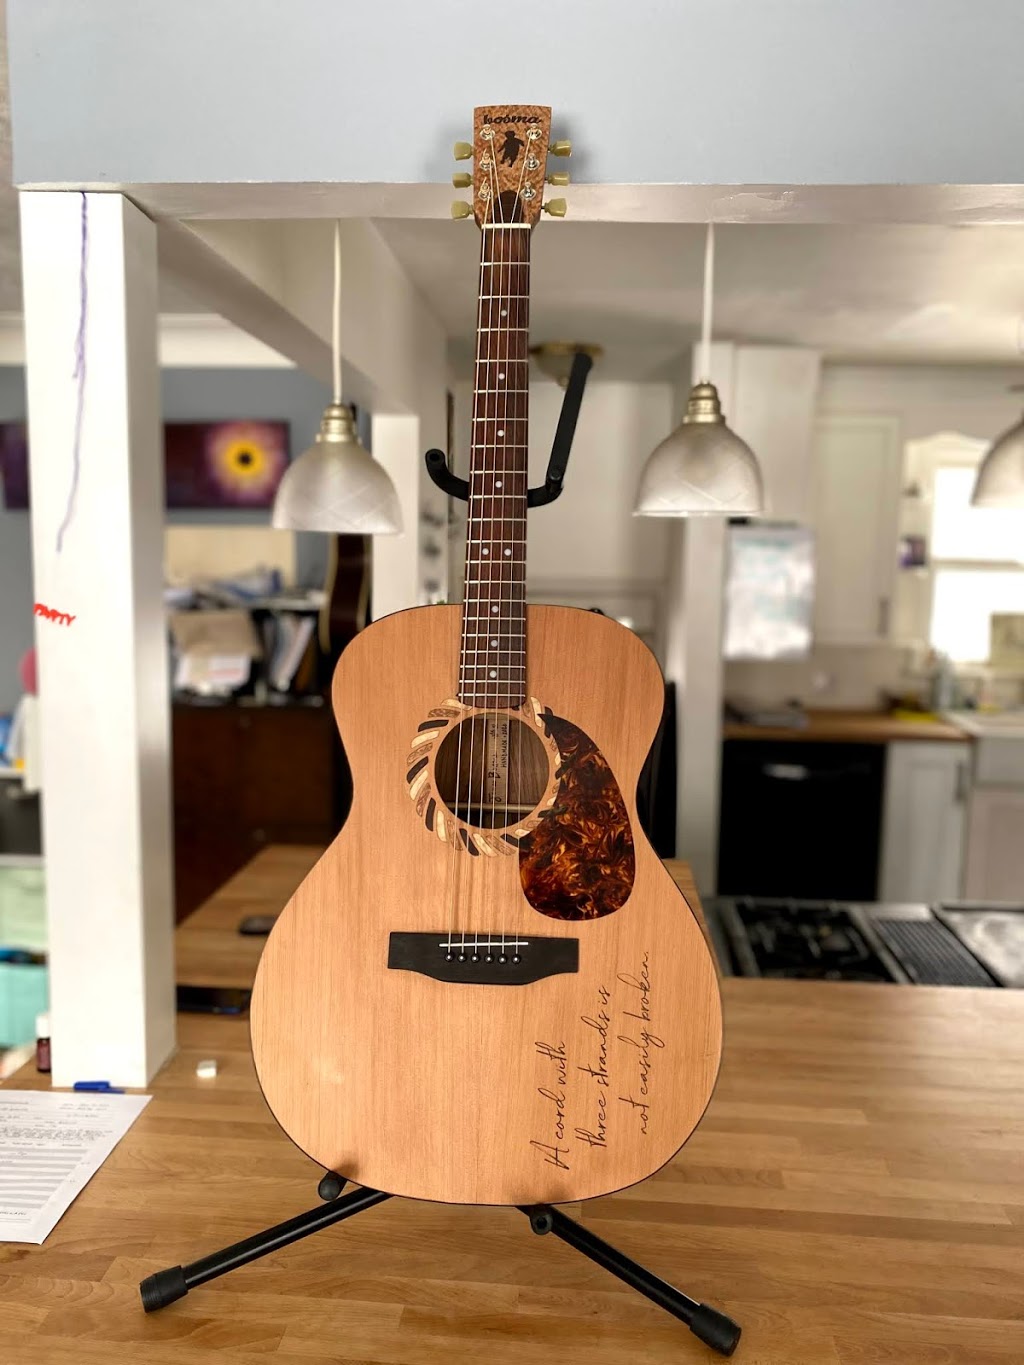 Mulrain Guitars | Please Phone or Email to make an Appointment for Instrument drop off at, 52 Oakhill Dr, Brantford, ON N3T 1R2, Canada | Phone: (519) 802-5110